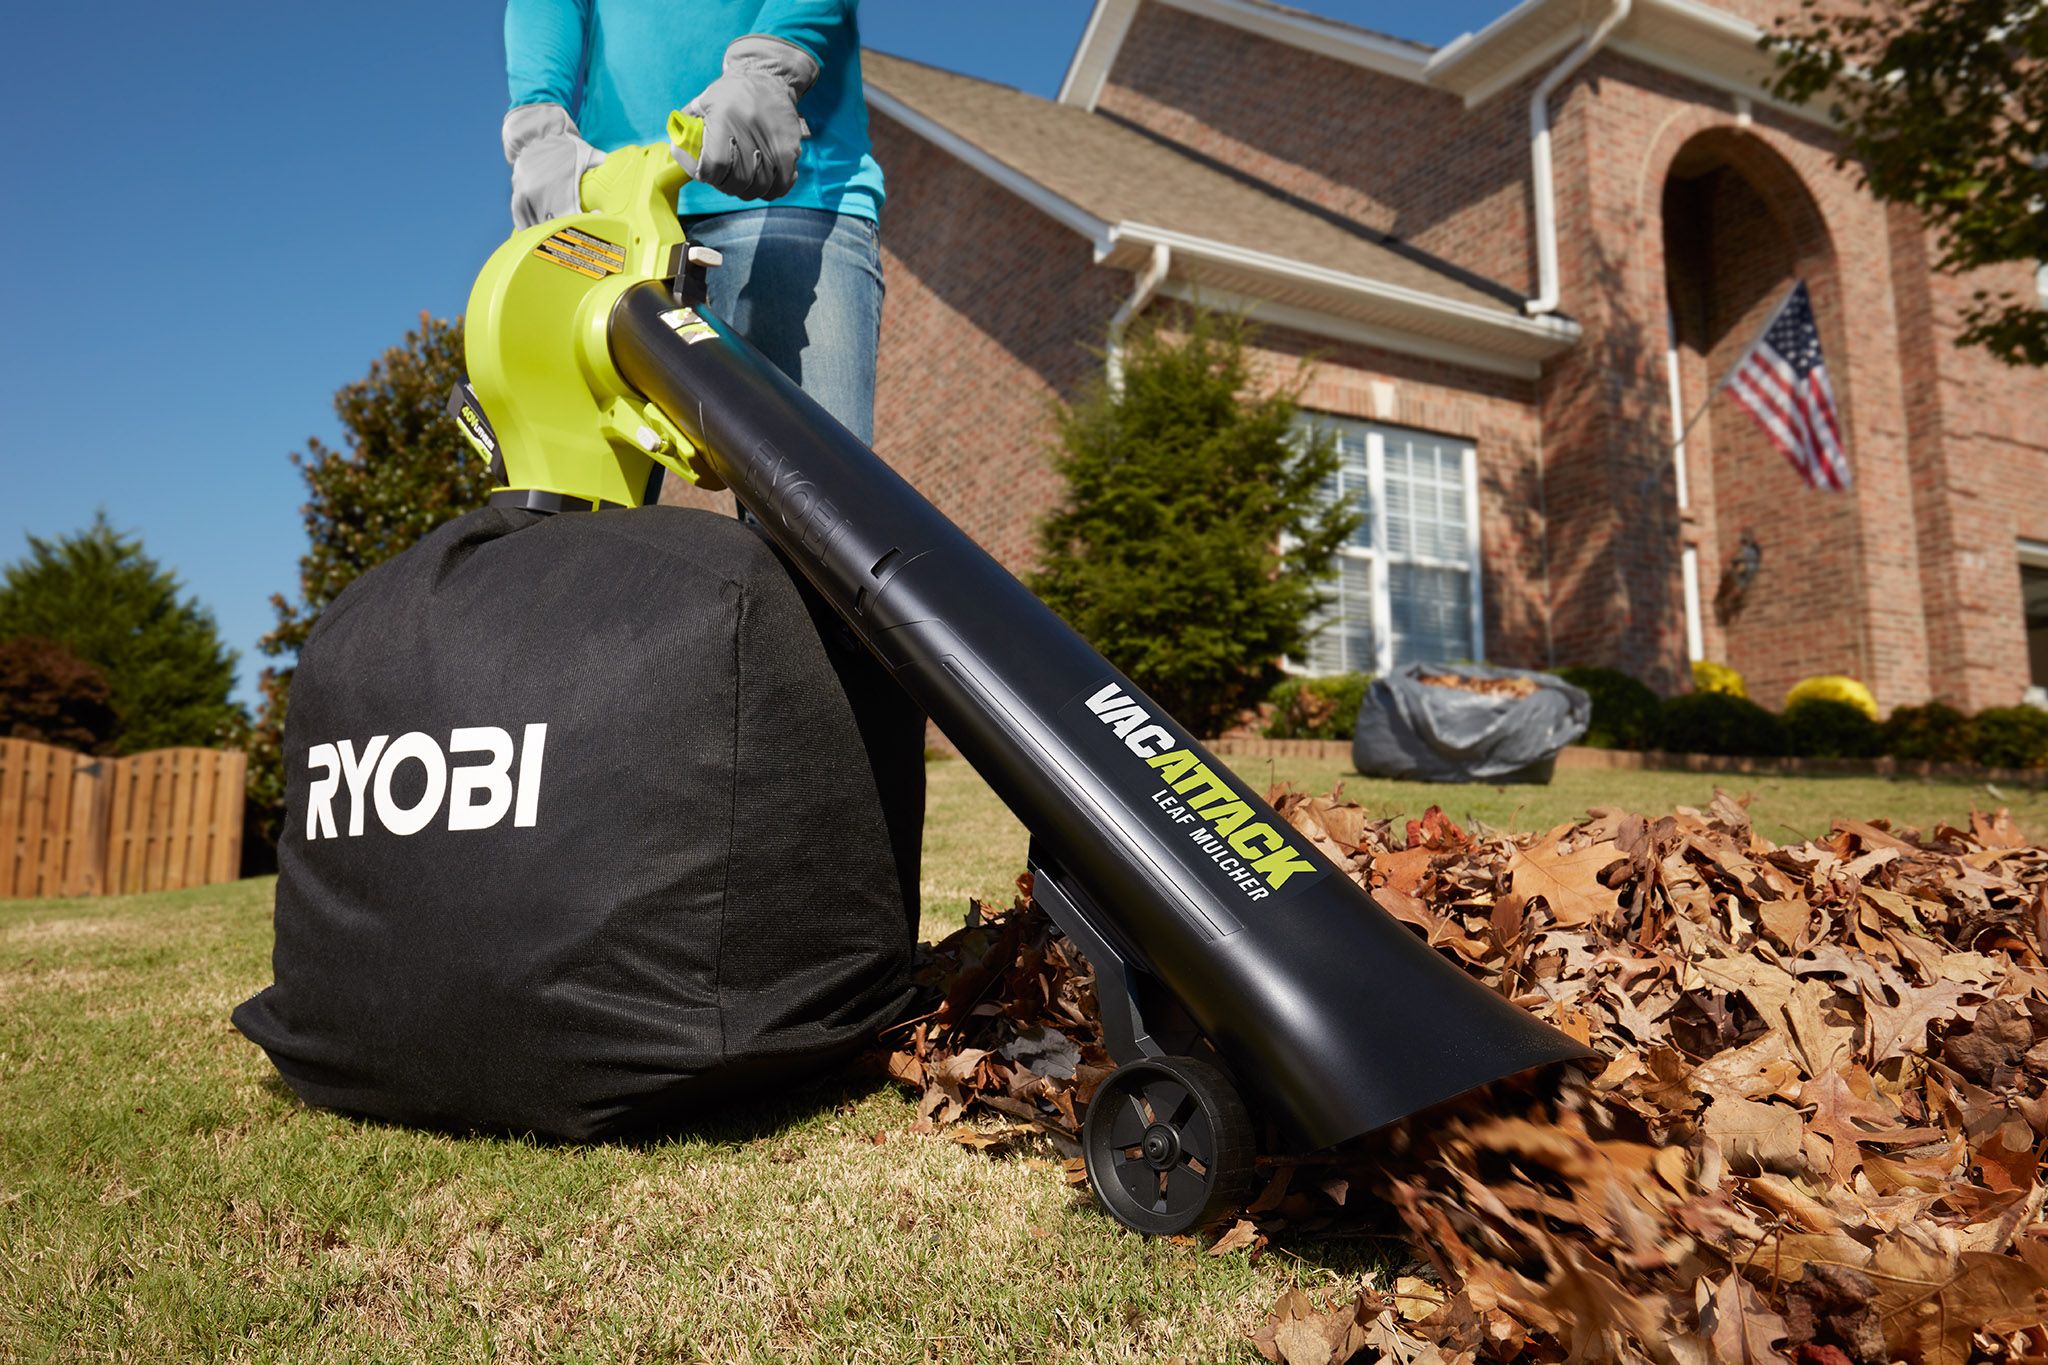 2-In-1 Vacuum and Mulching Functions